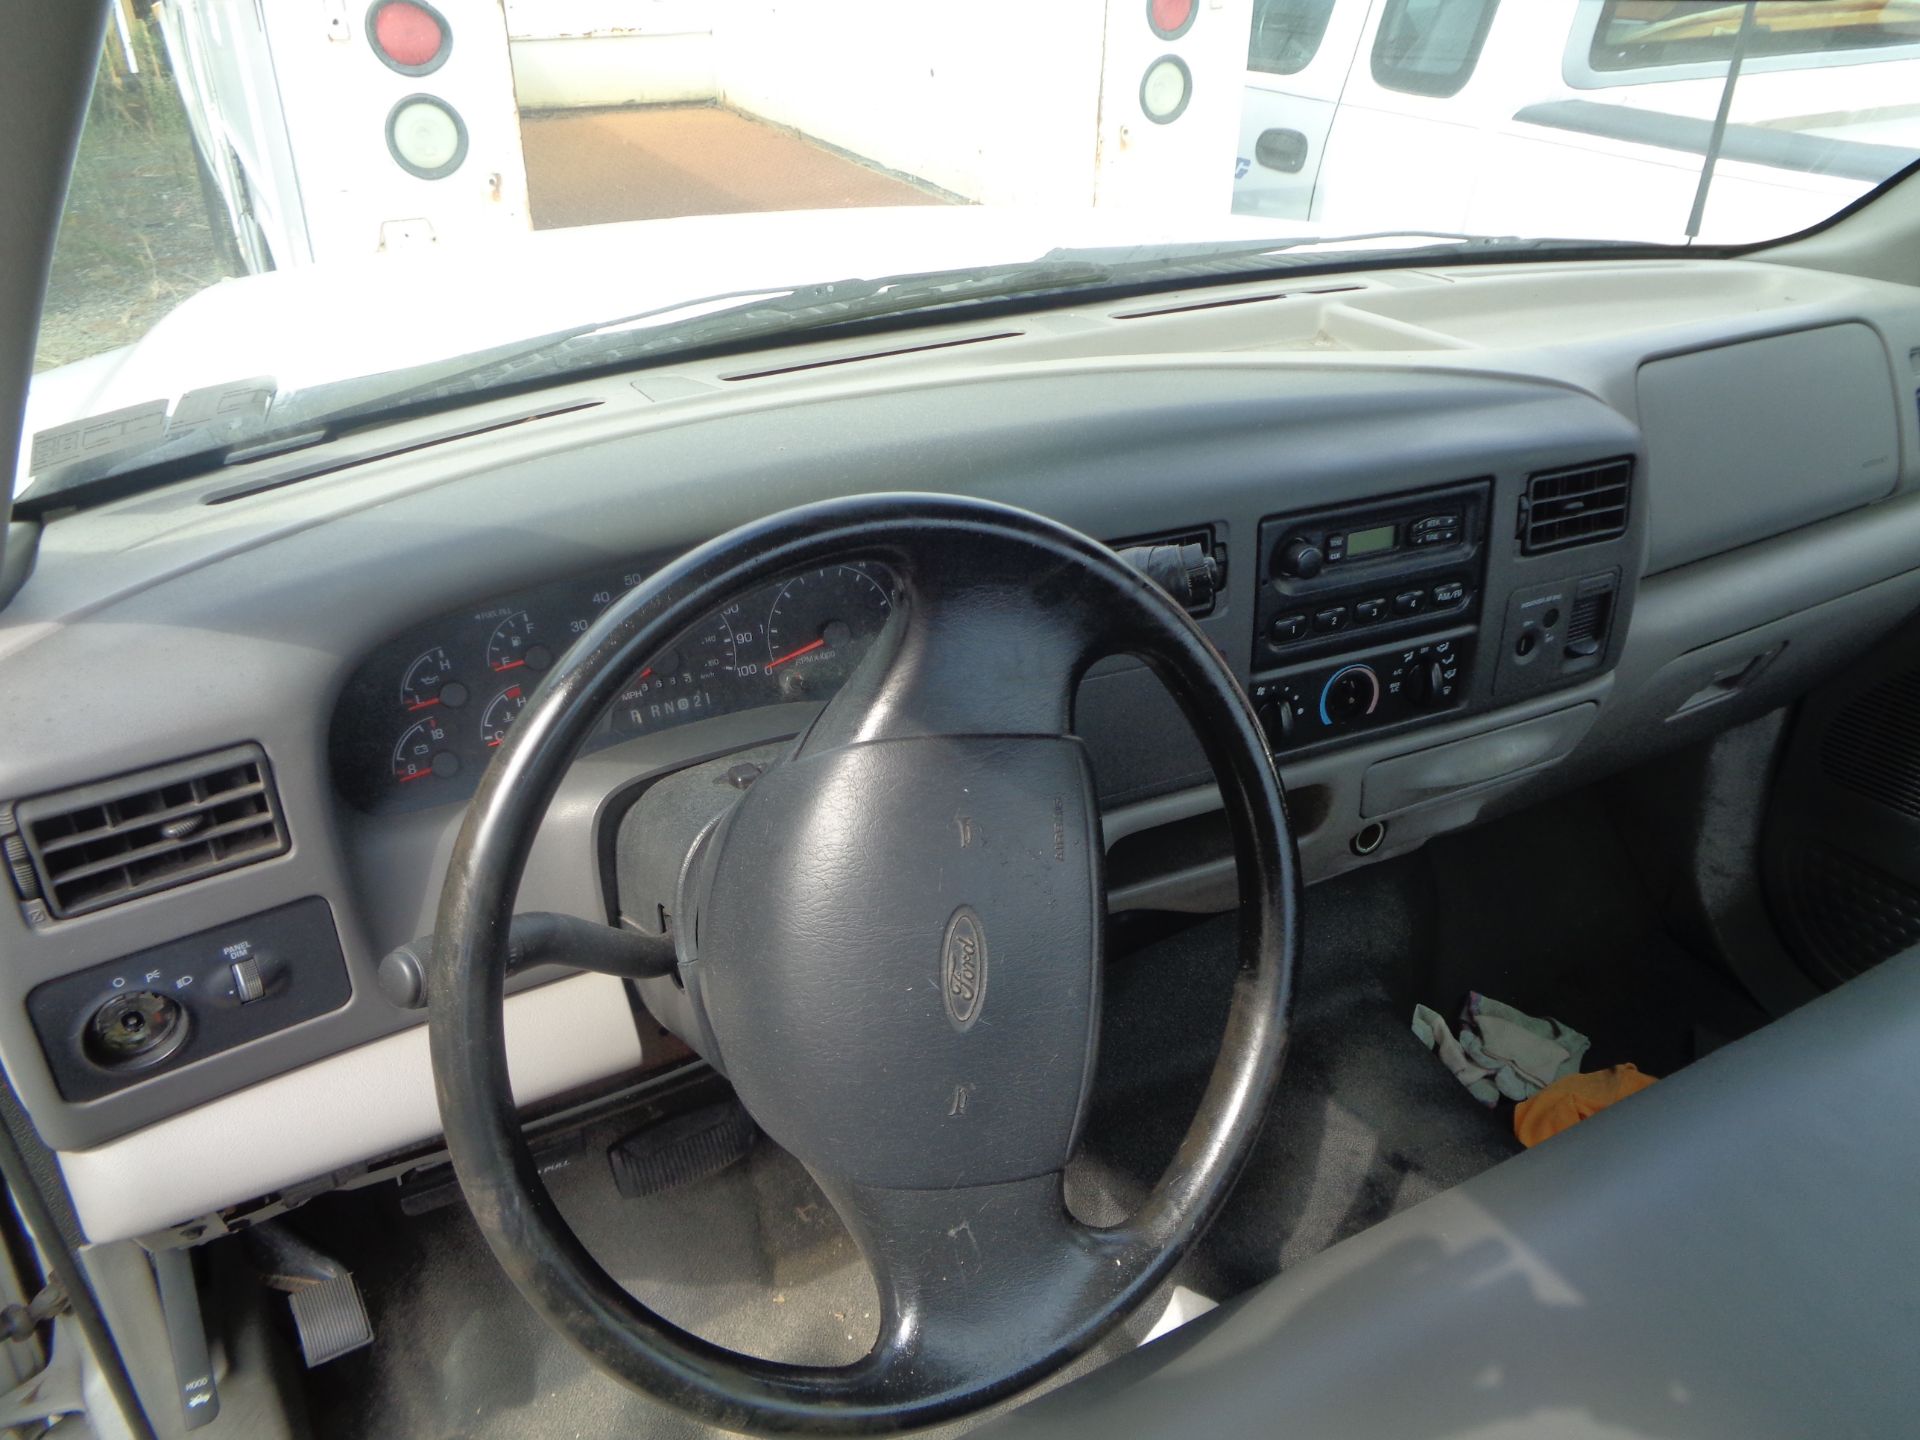 2000 Ford F250 Pick Up Truck - Image 6 of 8